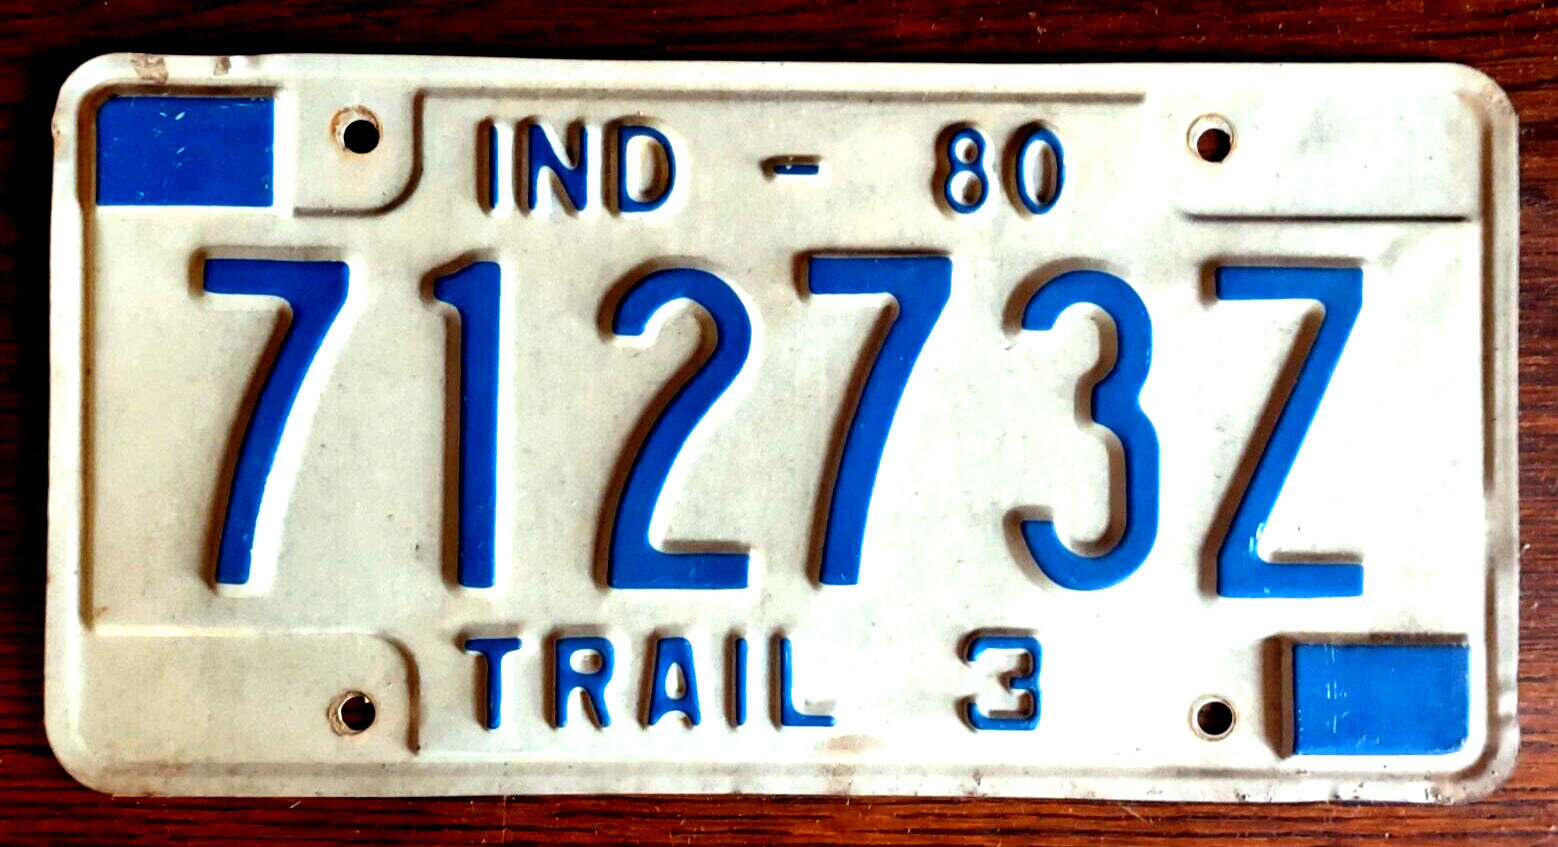 Indiana 1980 Blue on White Metal Expire License Plate Tag 71273Z Trail 3 Trailer